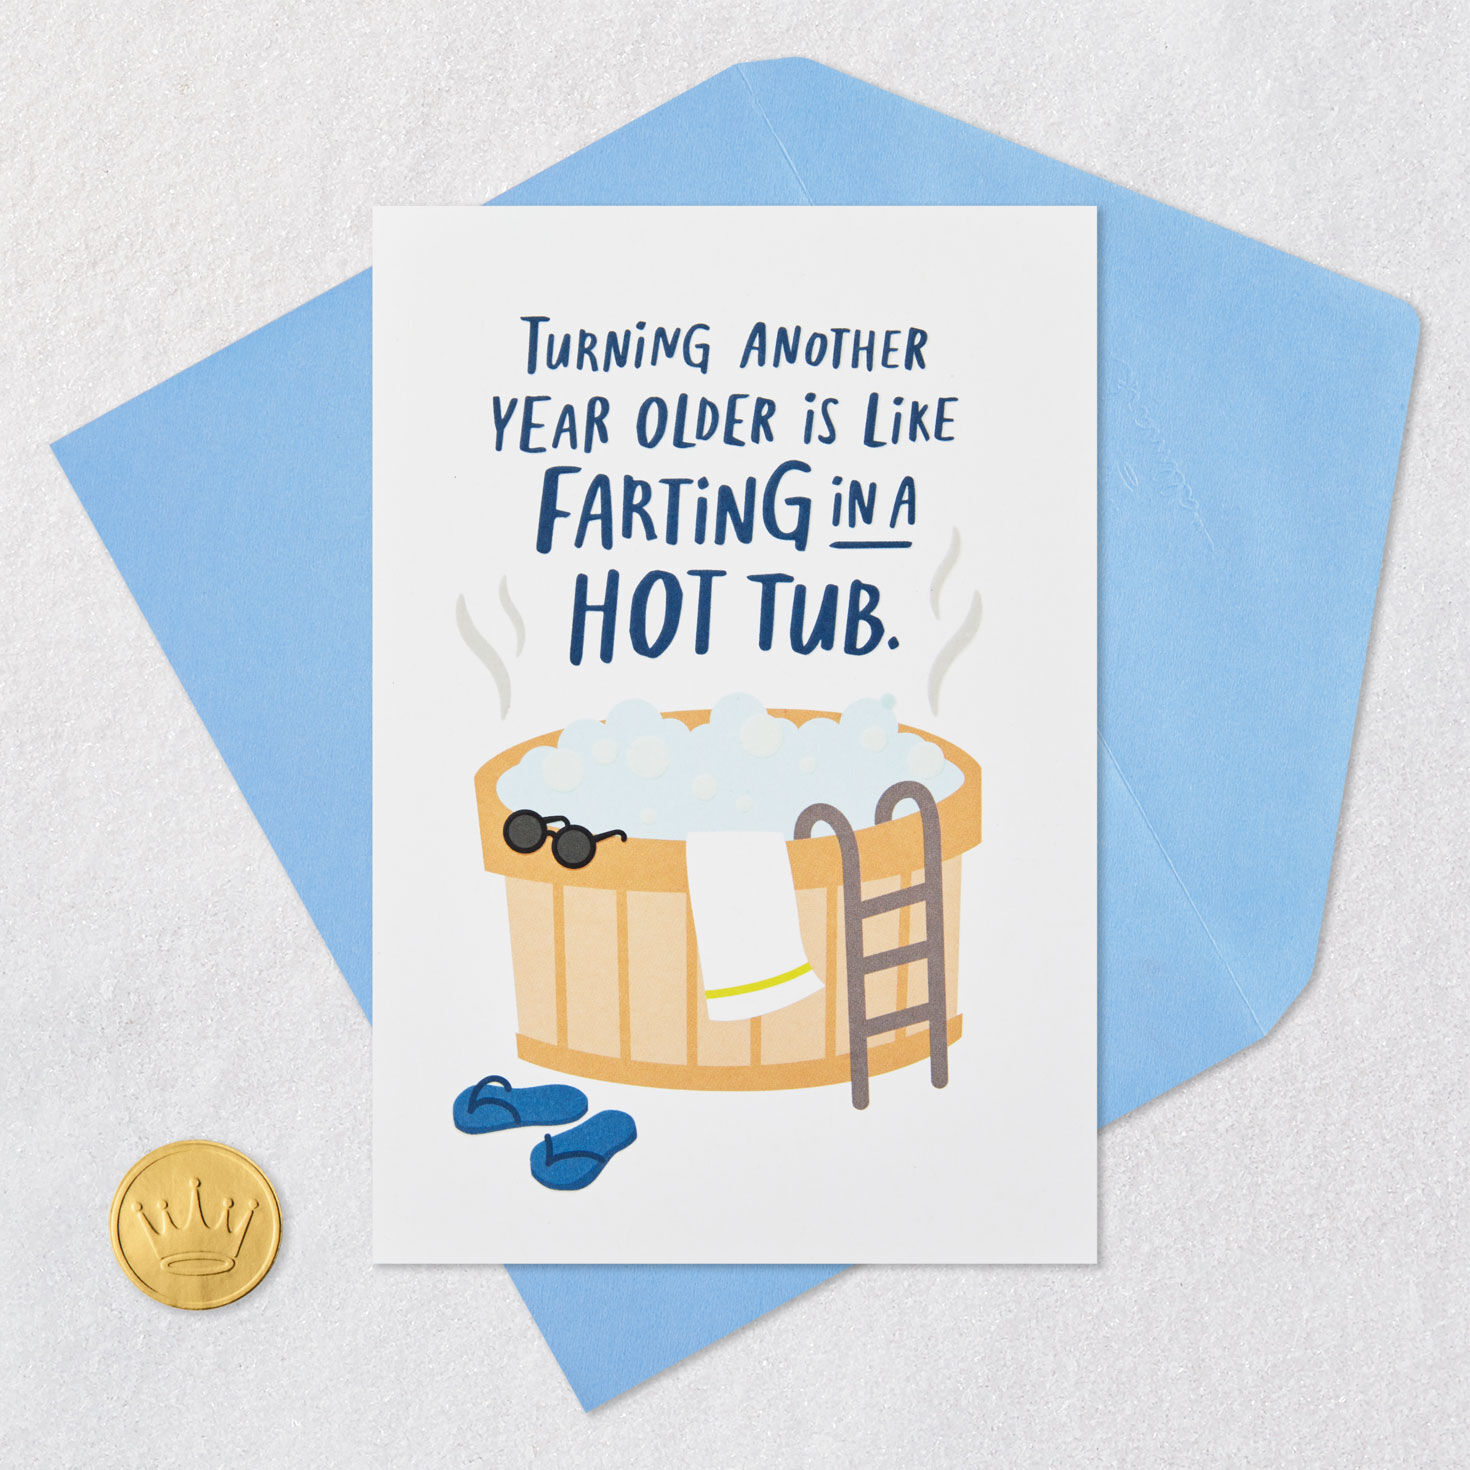 Like Farting in a Hot Tub Funny Birthday Card for only USD 4.49 | Hallmark